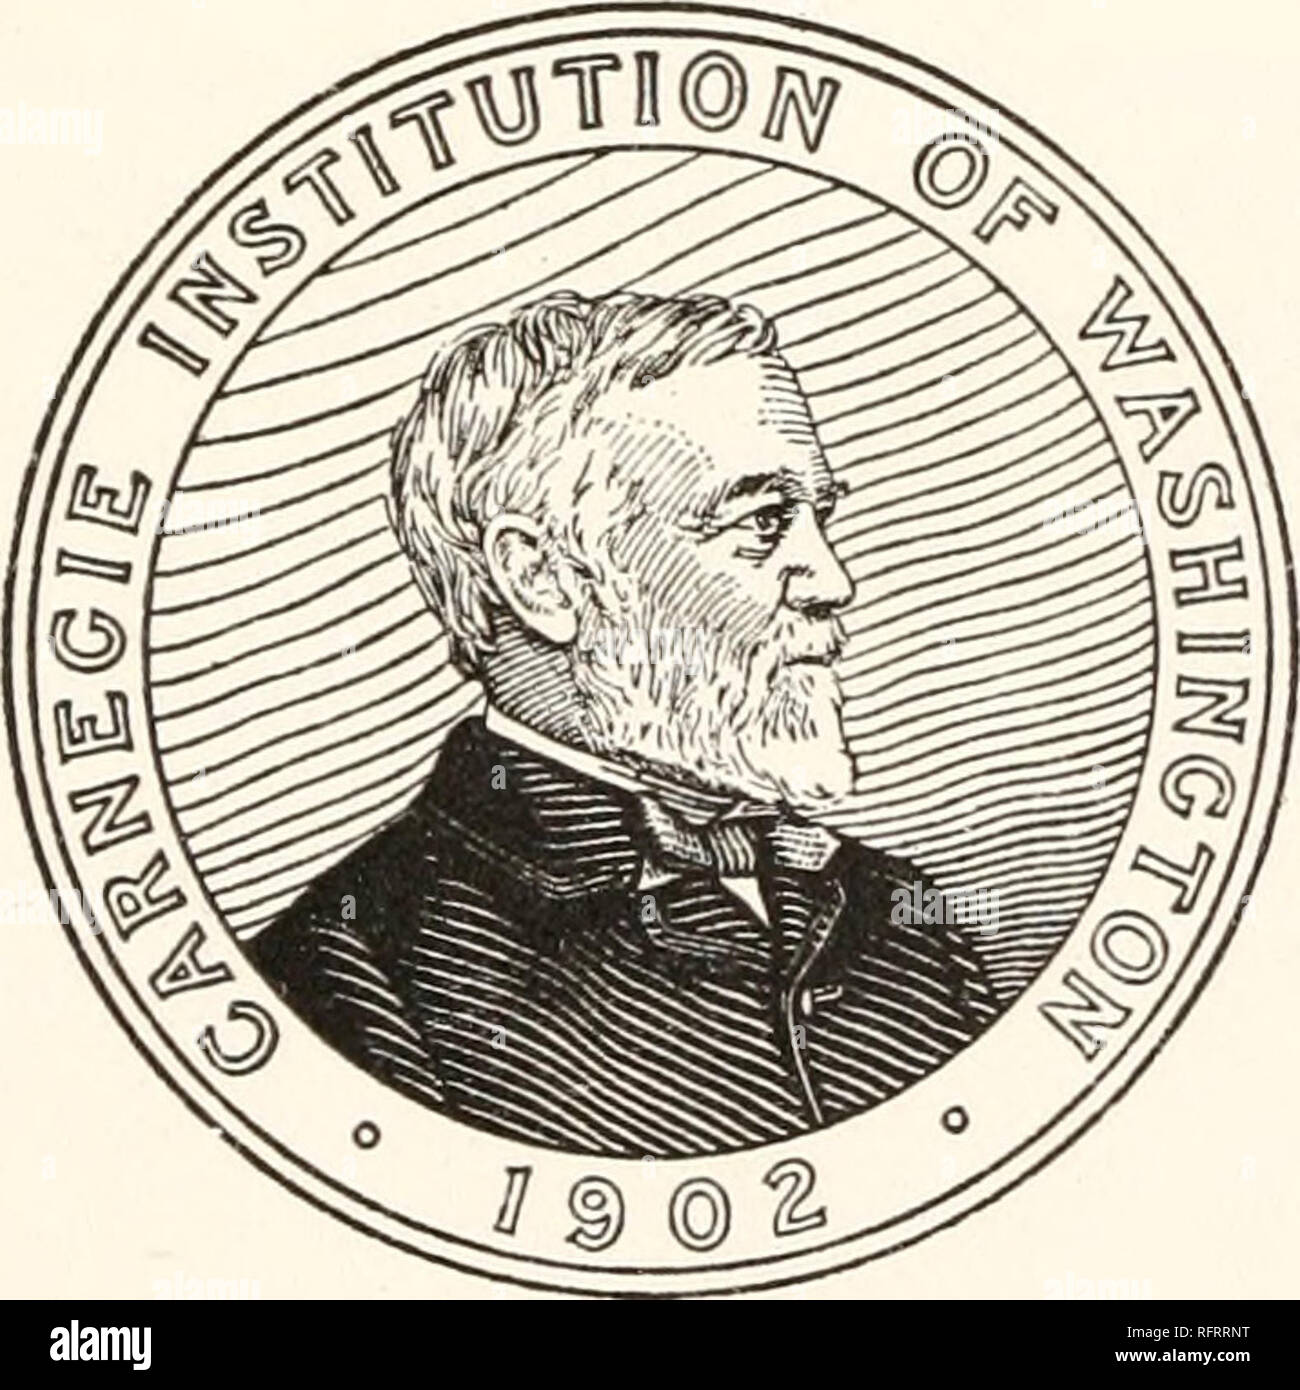 Carnegie Institution of Washington publication. Respiration Calorimeters  for Studying the Respiratory Exchange and Energy Transformations of Man BY  FRANCIS G. BENEDICT and THORNE M. CARPENTER. WASHINGTON, D. C. PUBLISHED BY  THE